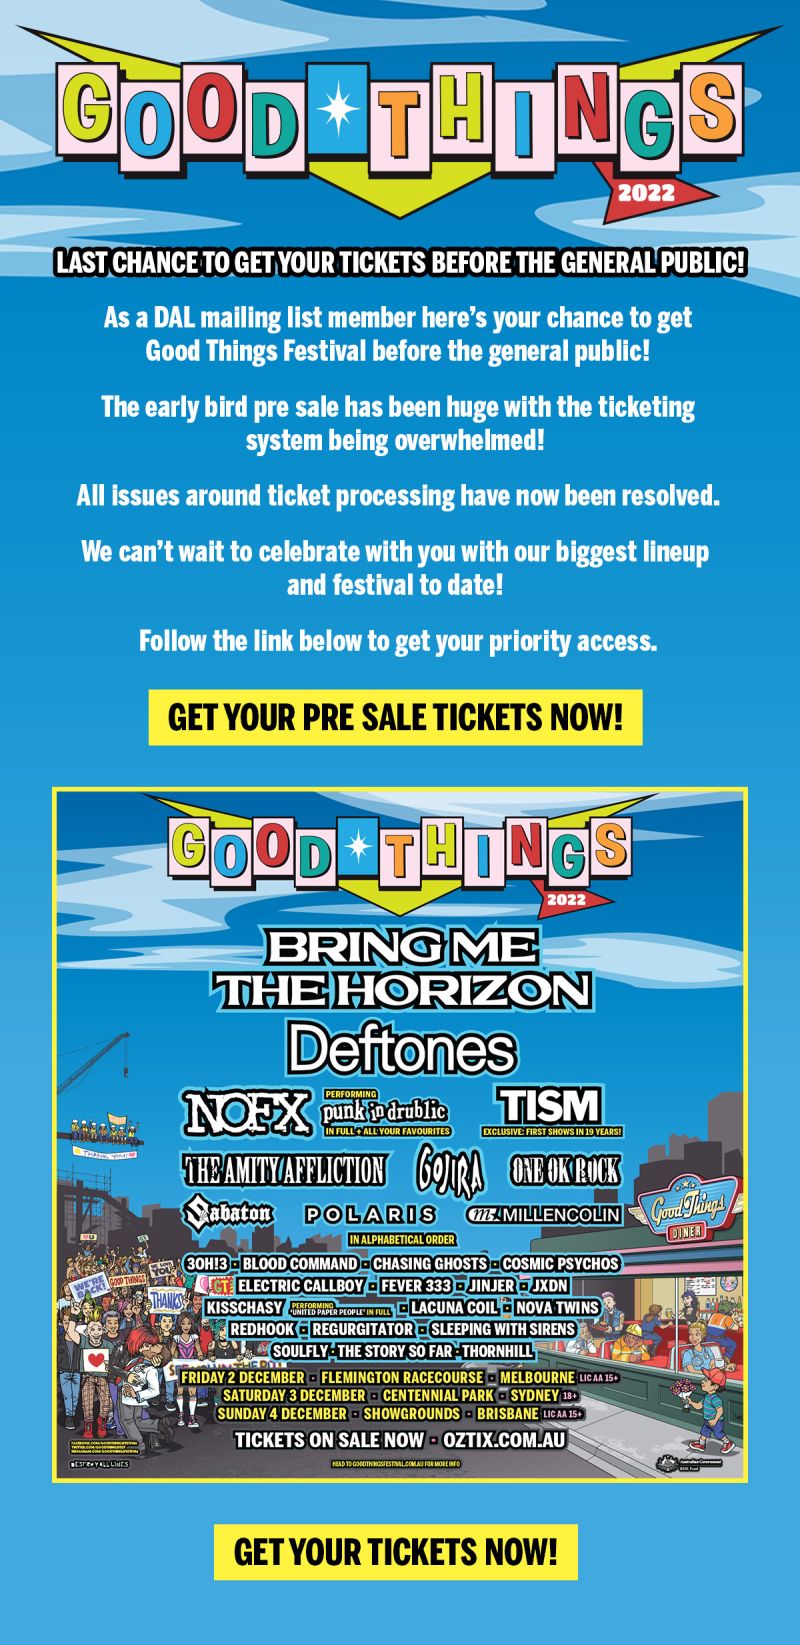 GOOD THINGS FESTIVAL 2022 - Early Bird Pre Sale On Now!